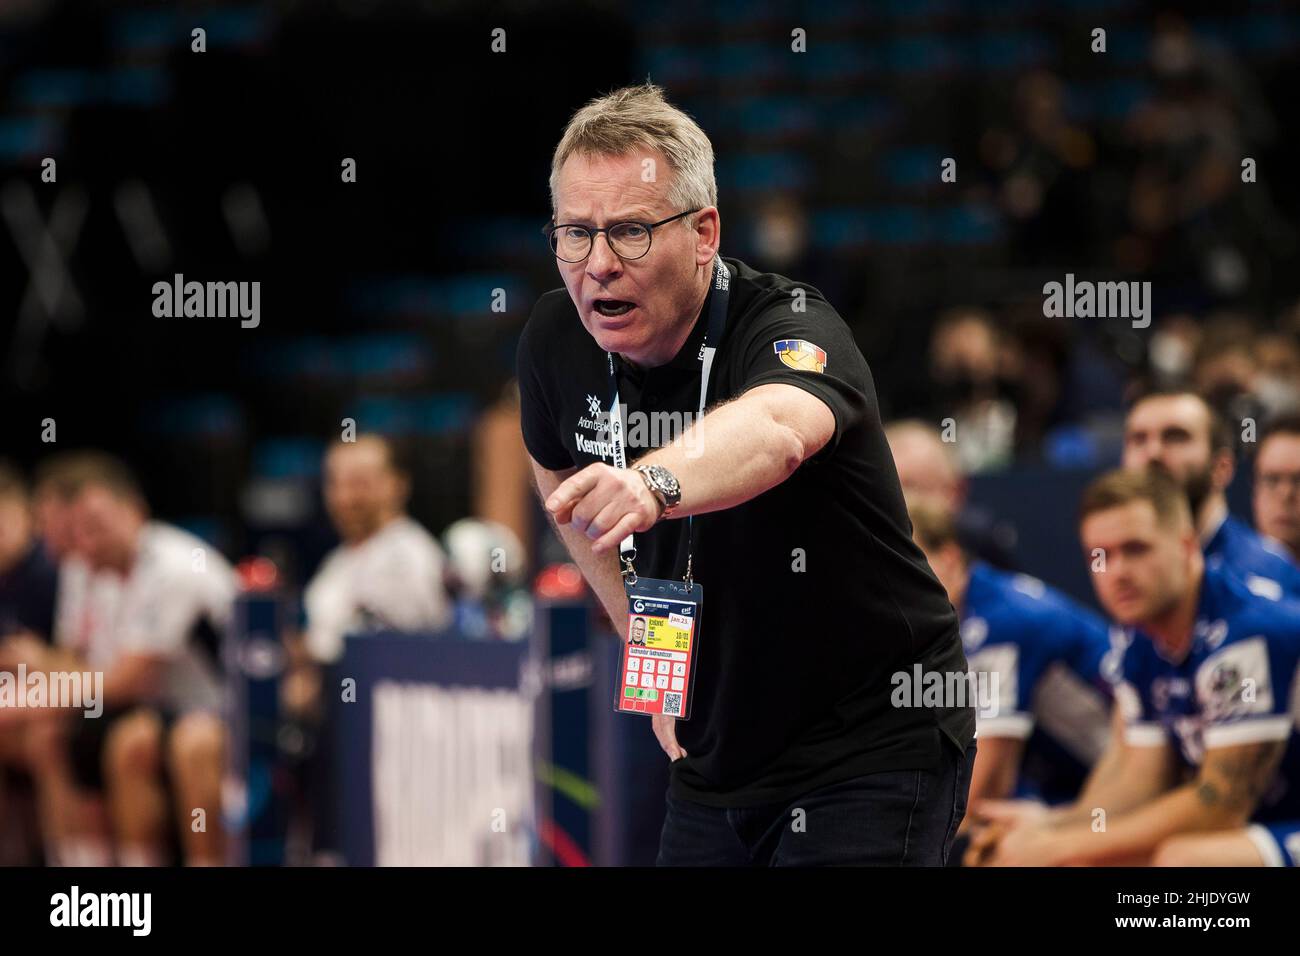 Budapest, Hungary, 28th January 2022. Head Coach Gudmundur Gudmundsson of Iceland gestures during the Men's EHF EURO 2022, Fifth Place Match between Iceland v Norway in Budapest, Hungary. January 28, 2022. Credit: Nikola Krstic/Alamy Stock Photo